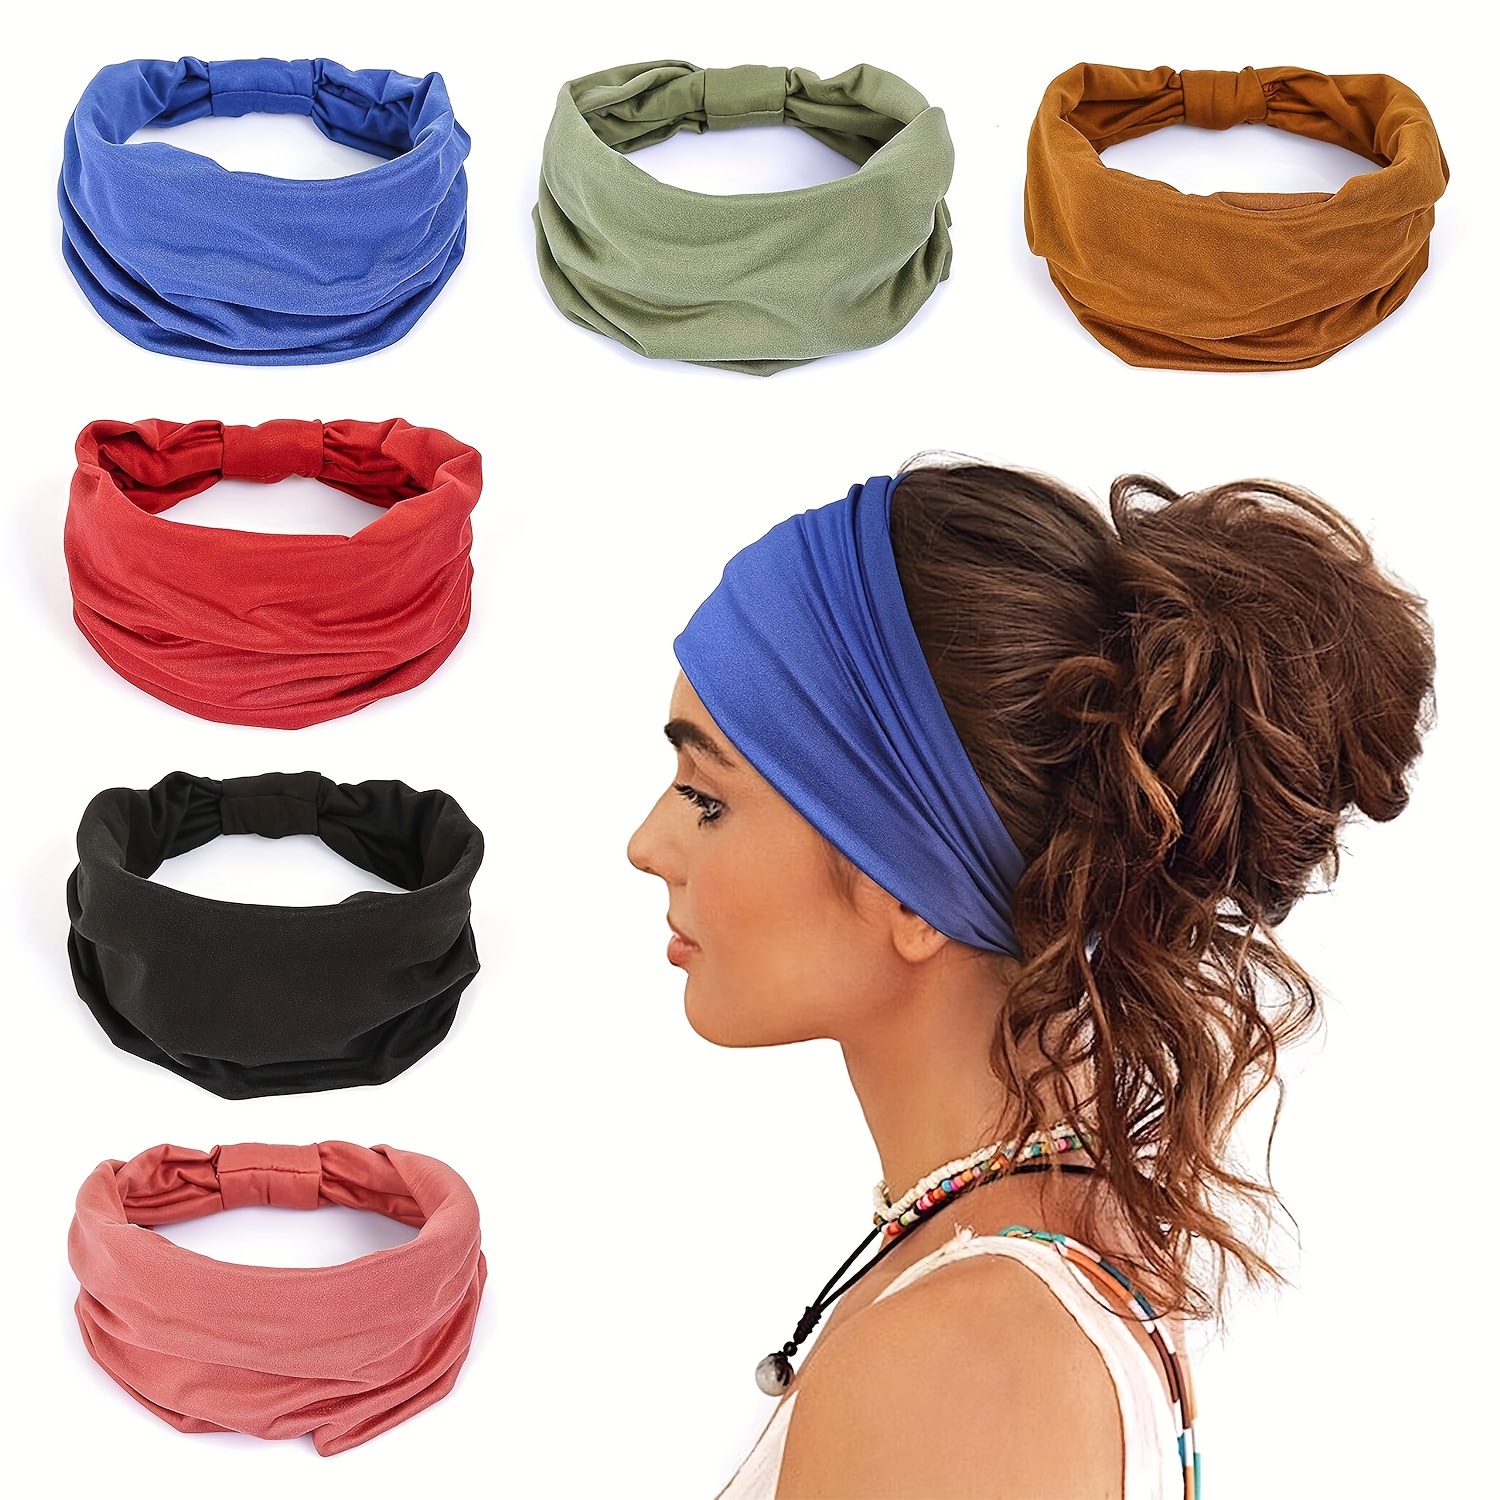 

6 Pack Wide Headbands For Women Non Slip Soft Elastic Hair Bands Yoga Running Sports Workout Gym Head Wraps, Knotted Cotton Cloth African Turbans Bandana